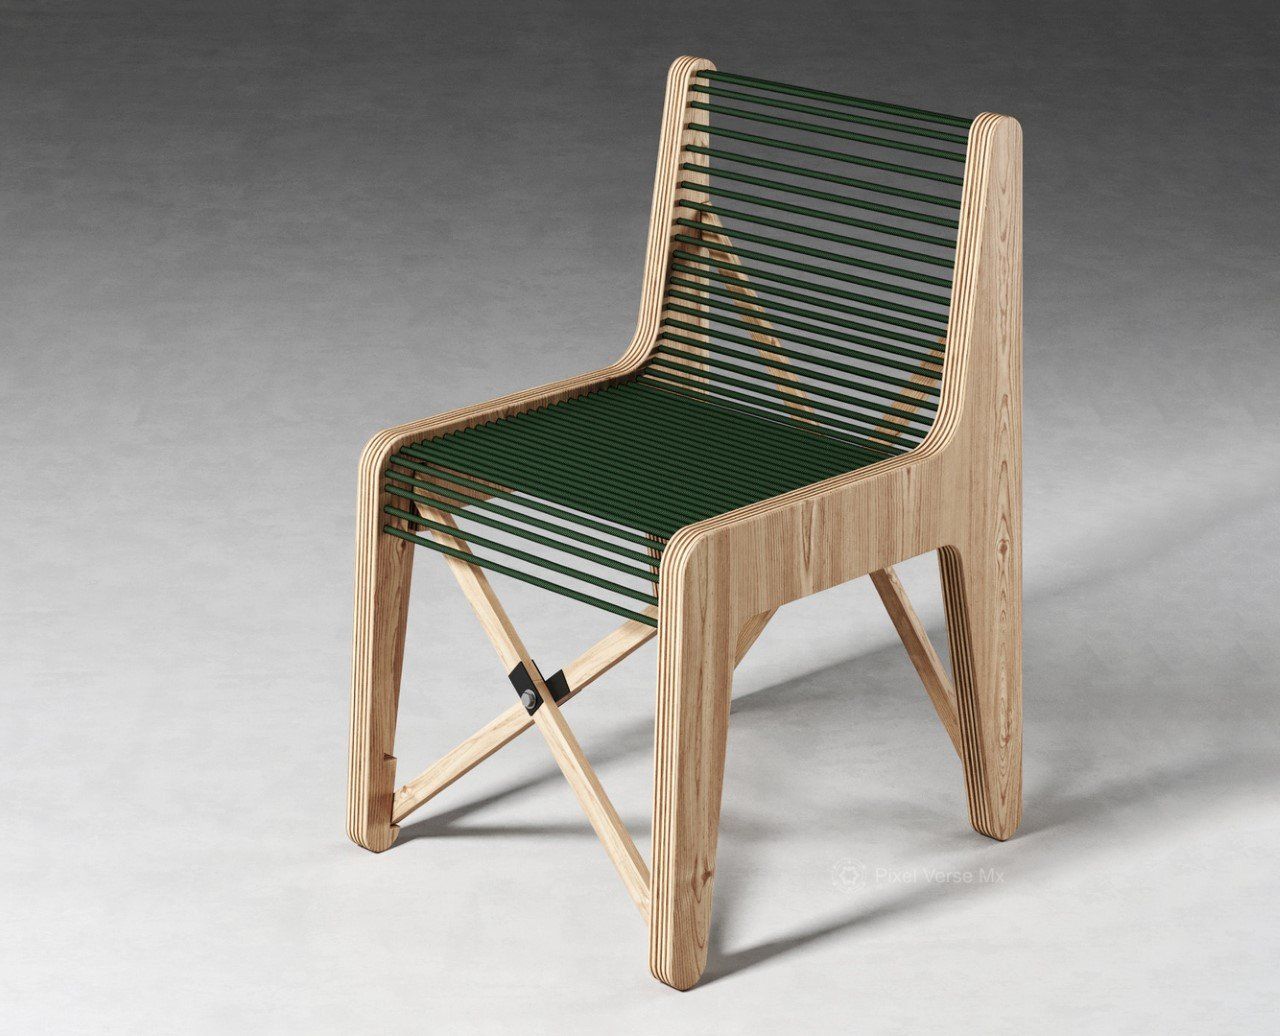 Portable Folding Chairs for Convenient Seating